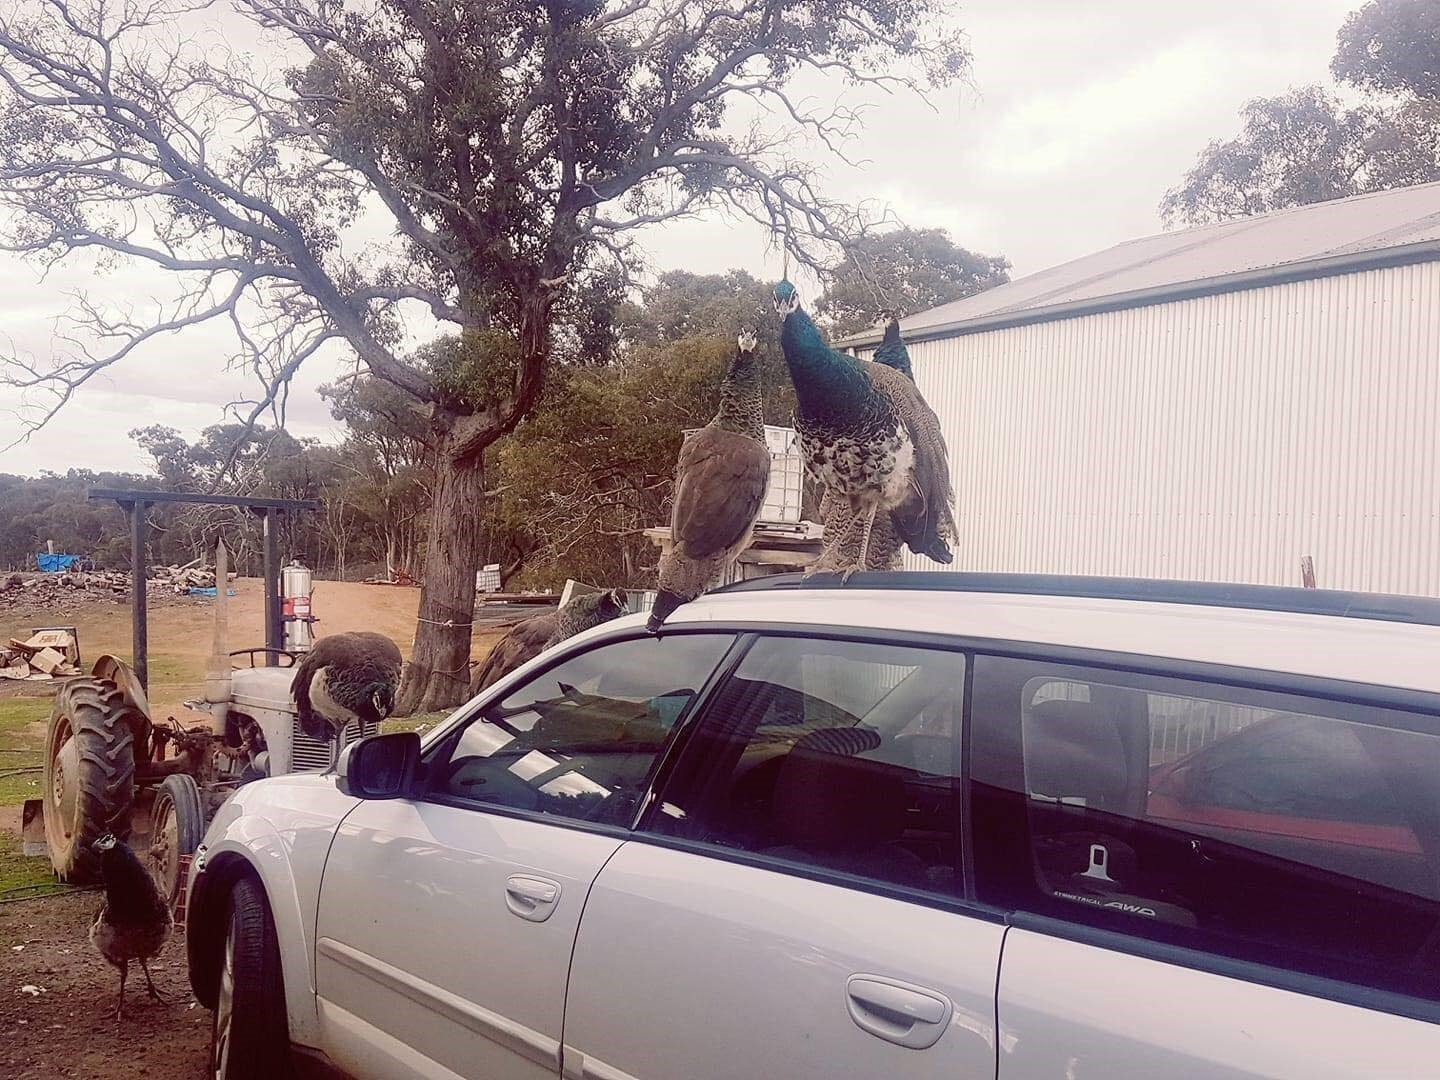 Peacocks on top of a car